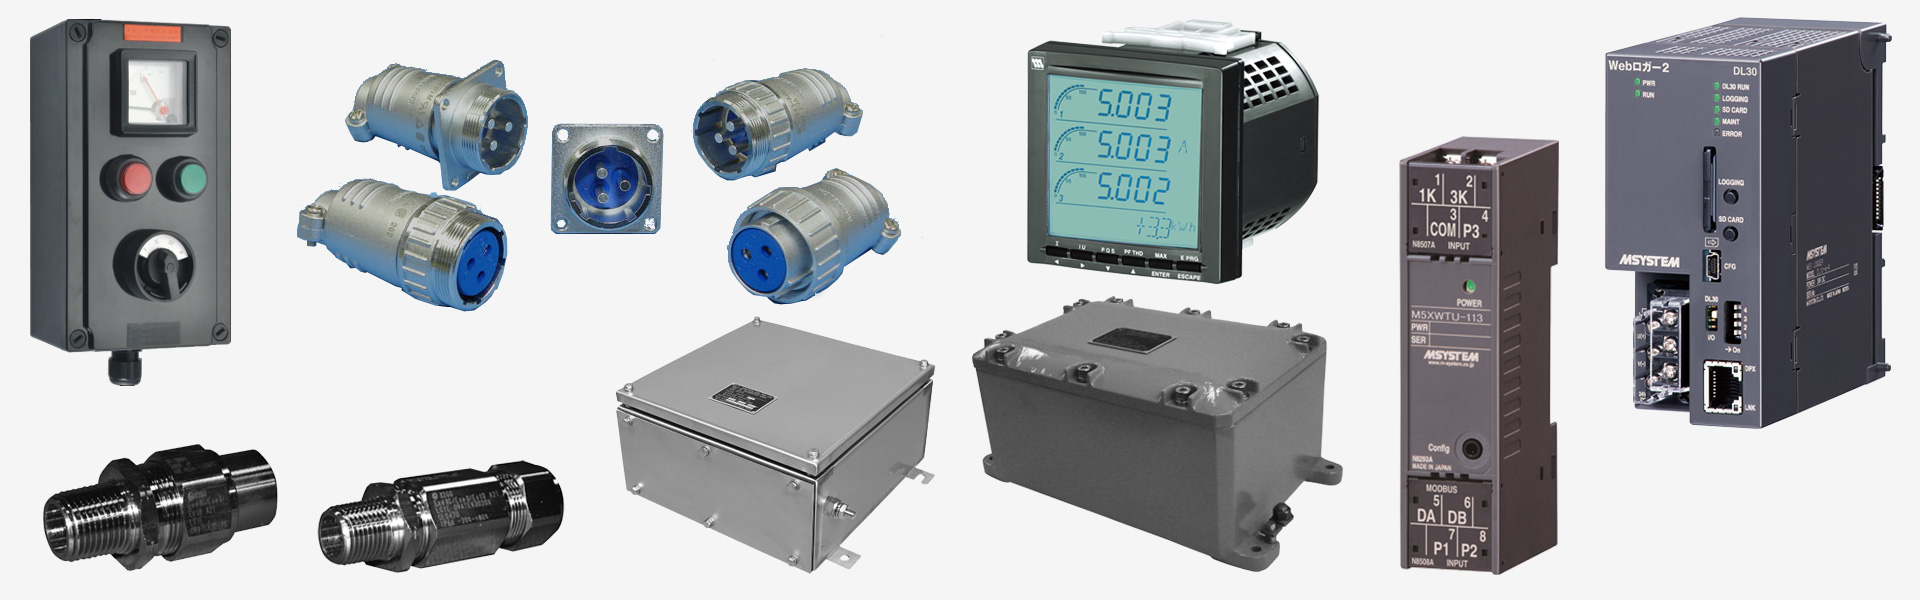 Electrical equipment components